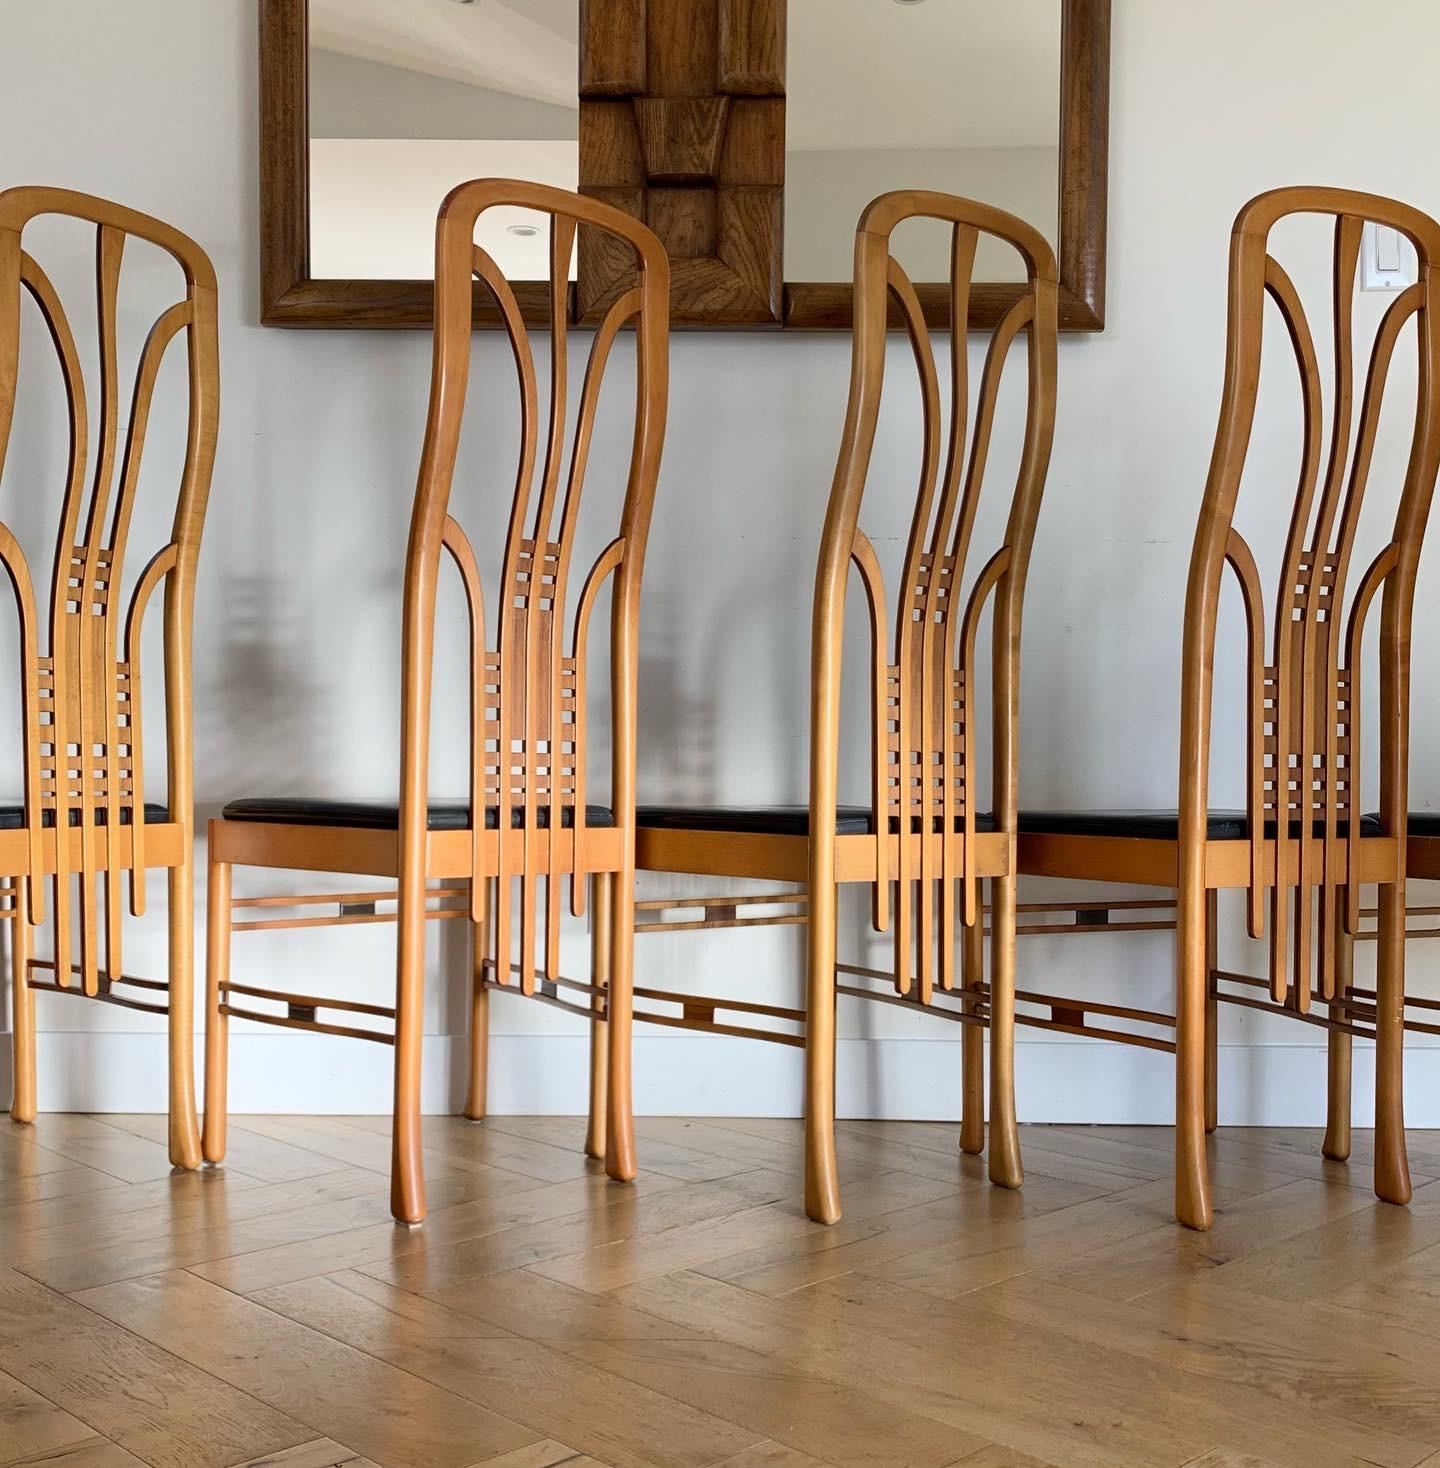 A very unique set of 6 Art Nouveau / Art Deco Frank Lloyd Wright style dining chairs by Masterly, early 1960s. Made in Italy. Hand-crafted wood with whiplash curved backs, flare legs, and black leather (real leather) seats. Minor signs of age - for